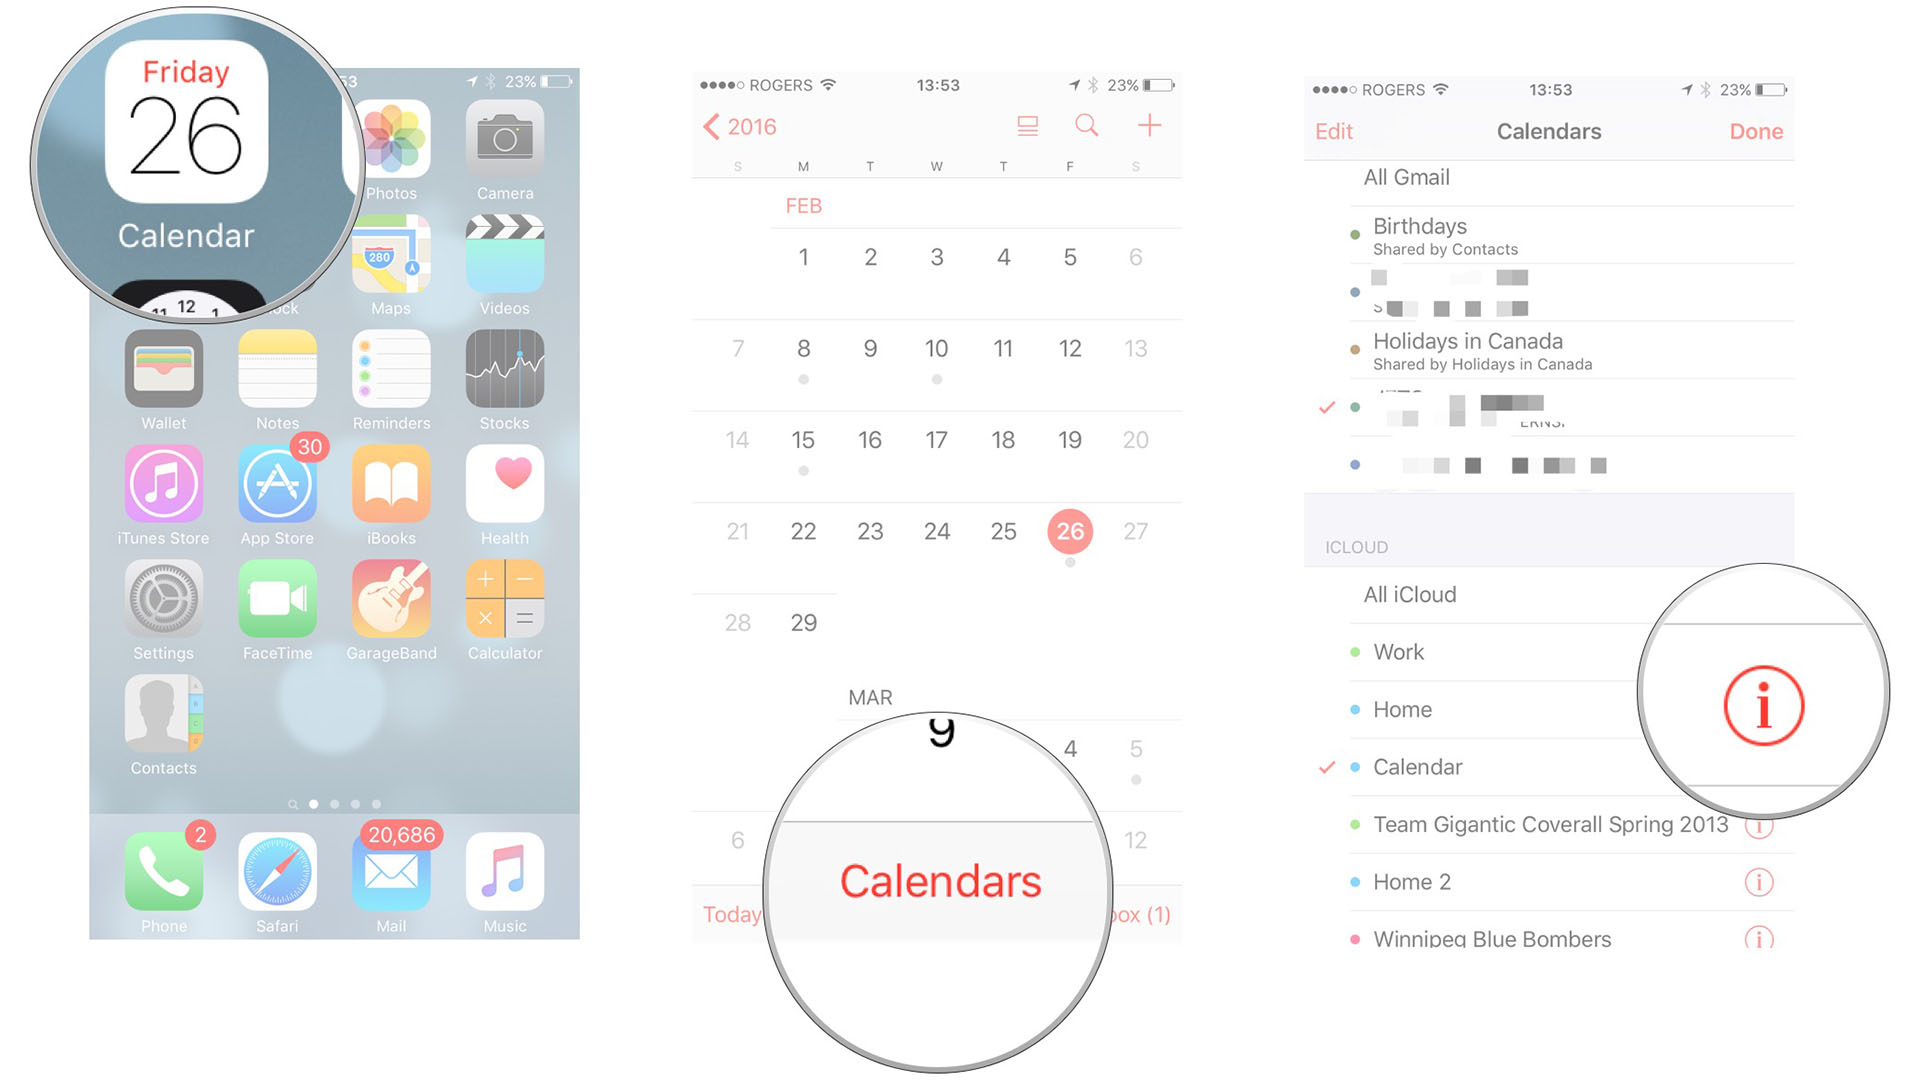 Share an iCloud calendar on iPhone and iPad by showing: Open the Calendar app, tap the calendars button, then tap the info button